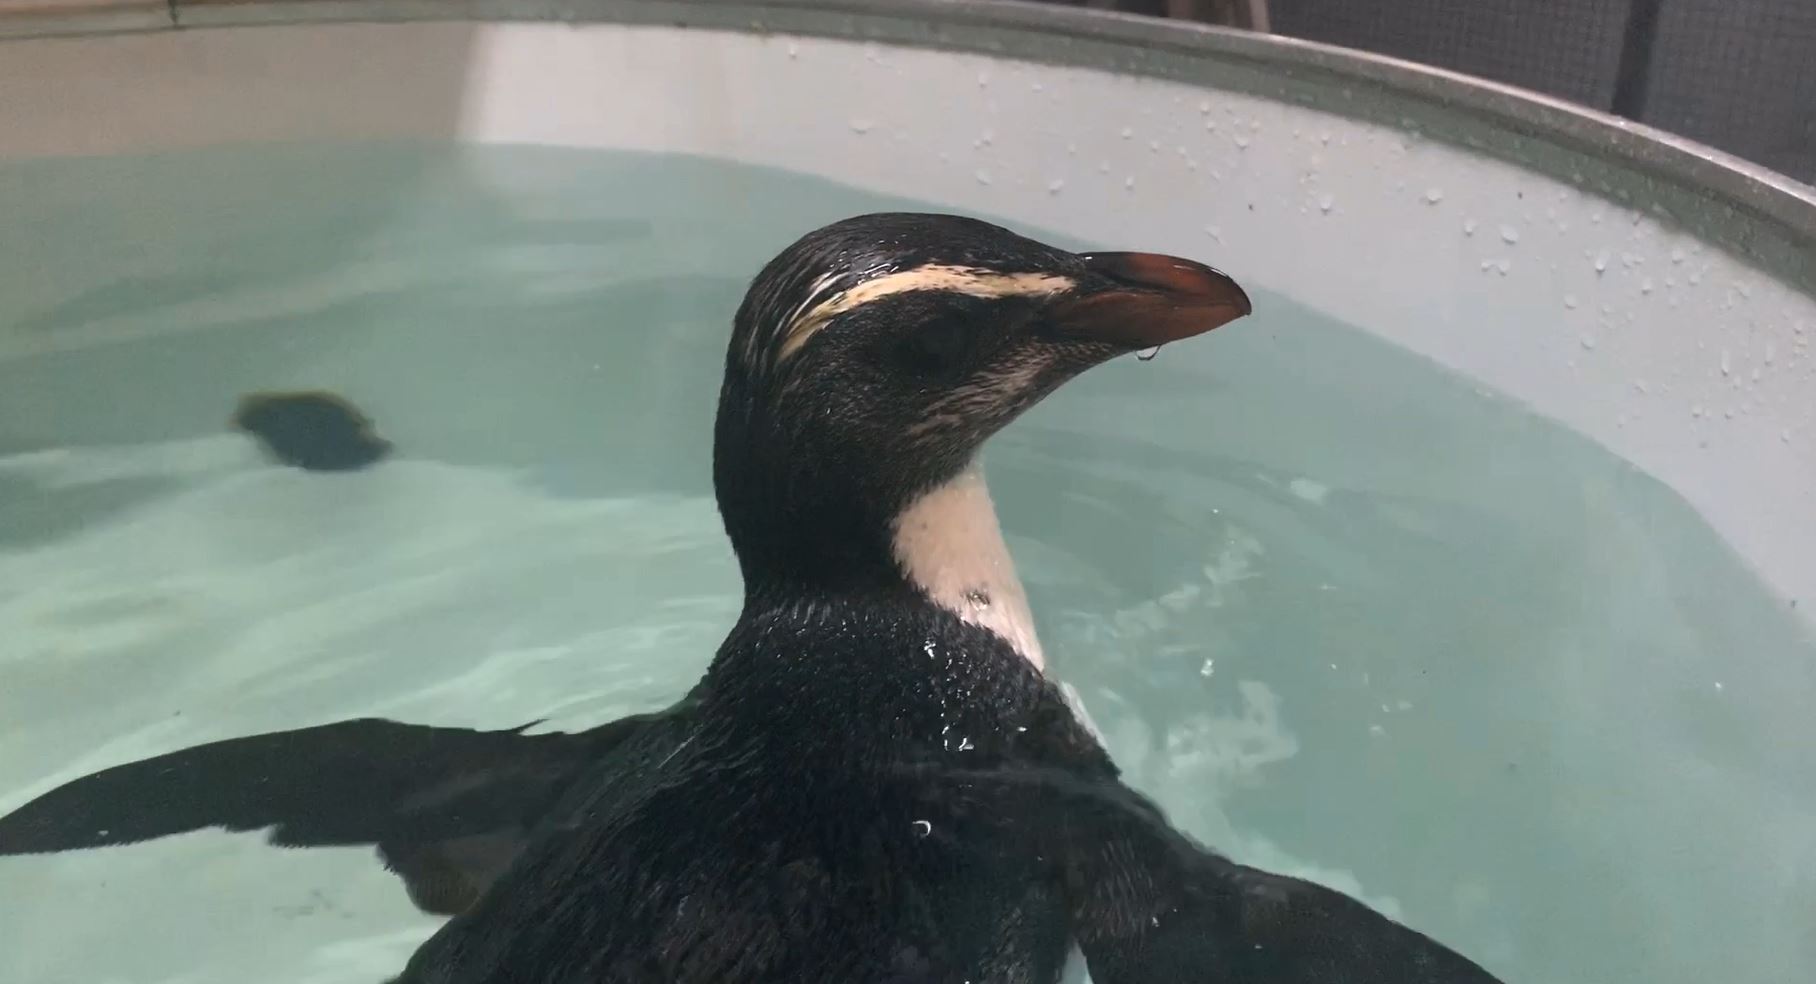 The Fiordland Penguin needed build up strength and muscle with monitored swimming sessions